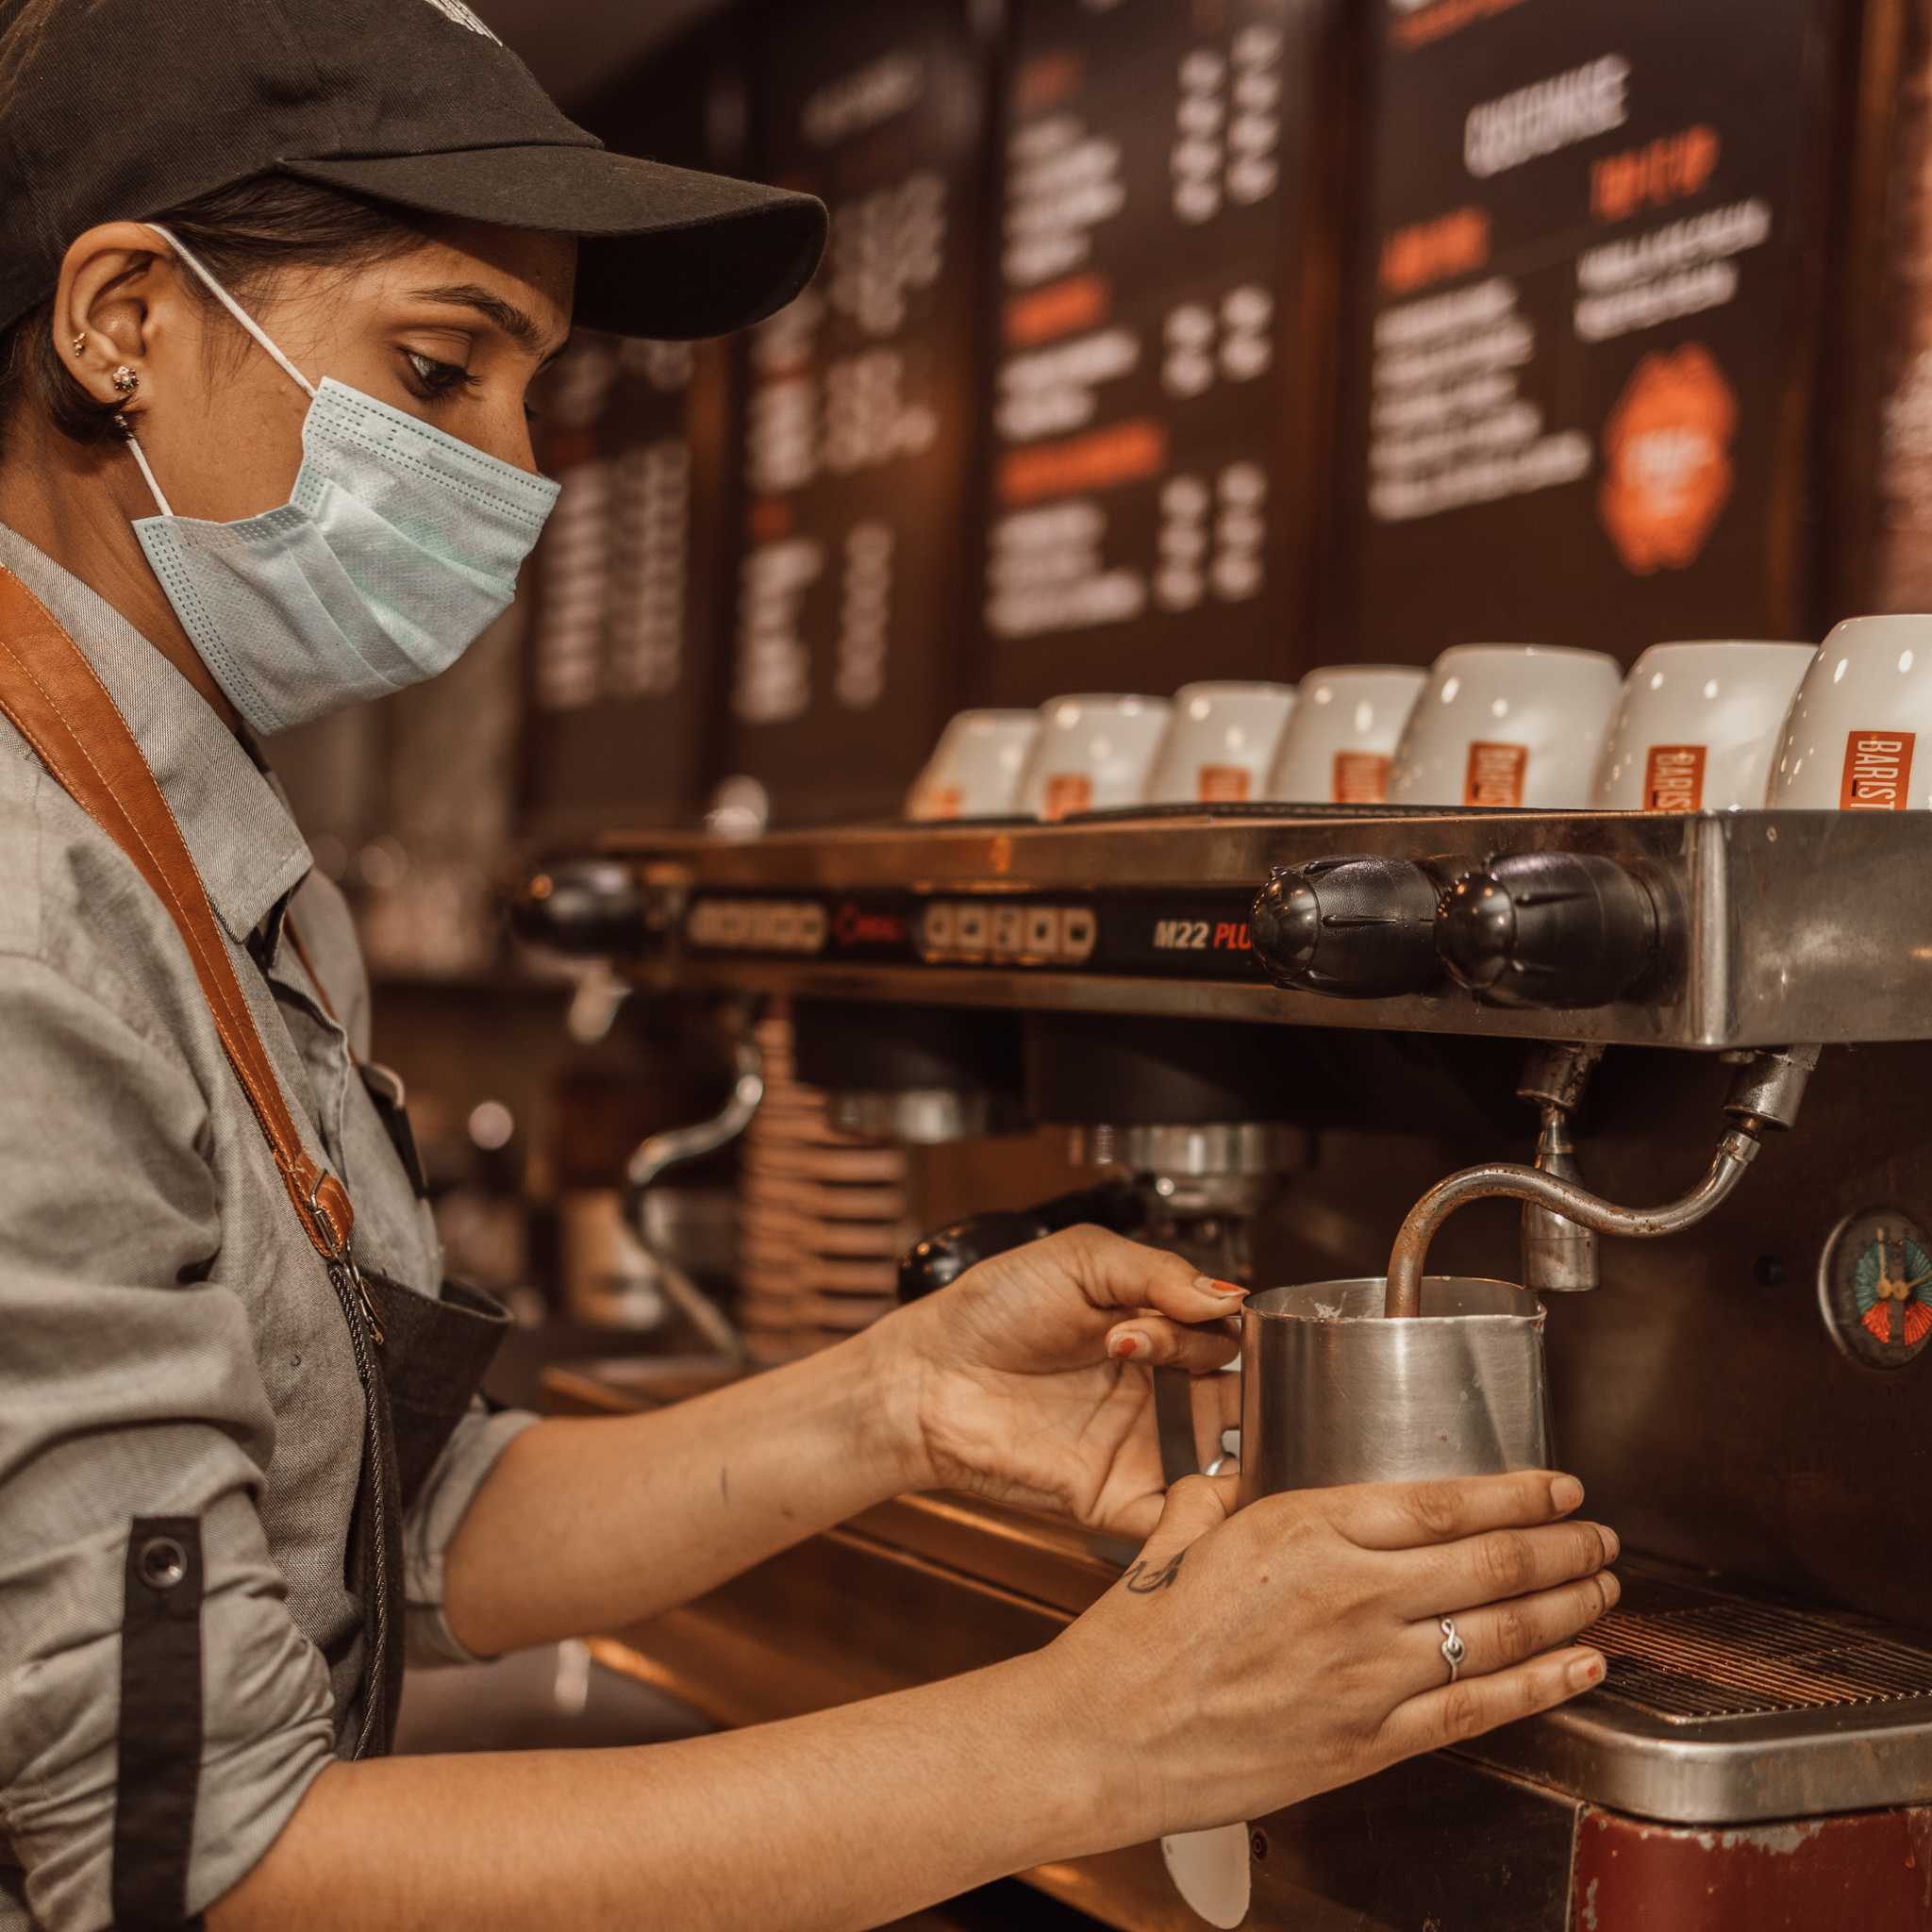 Barista Coffee Company Awarded with Business Growth at Restaurant India Awards 2022